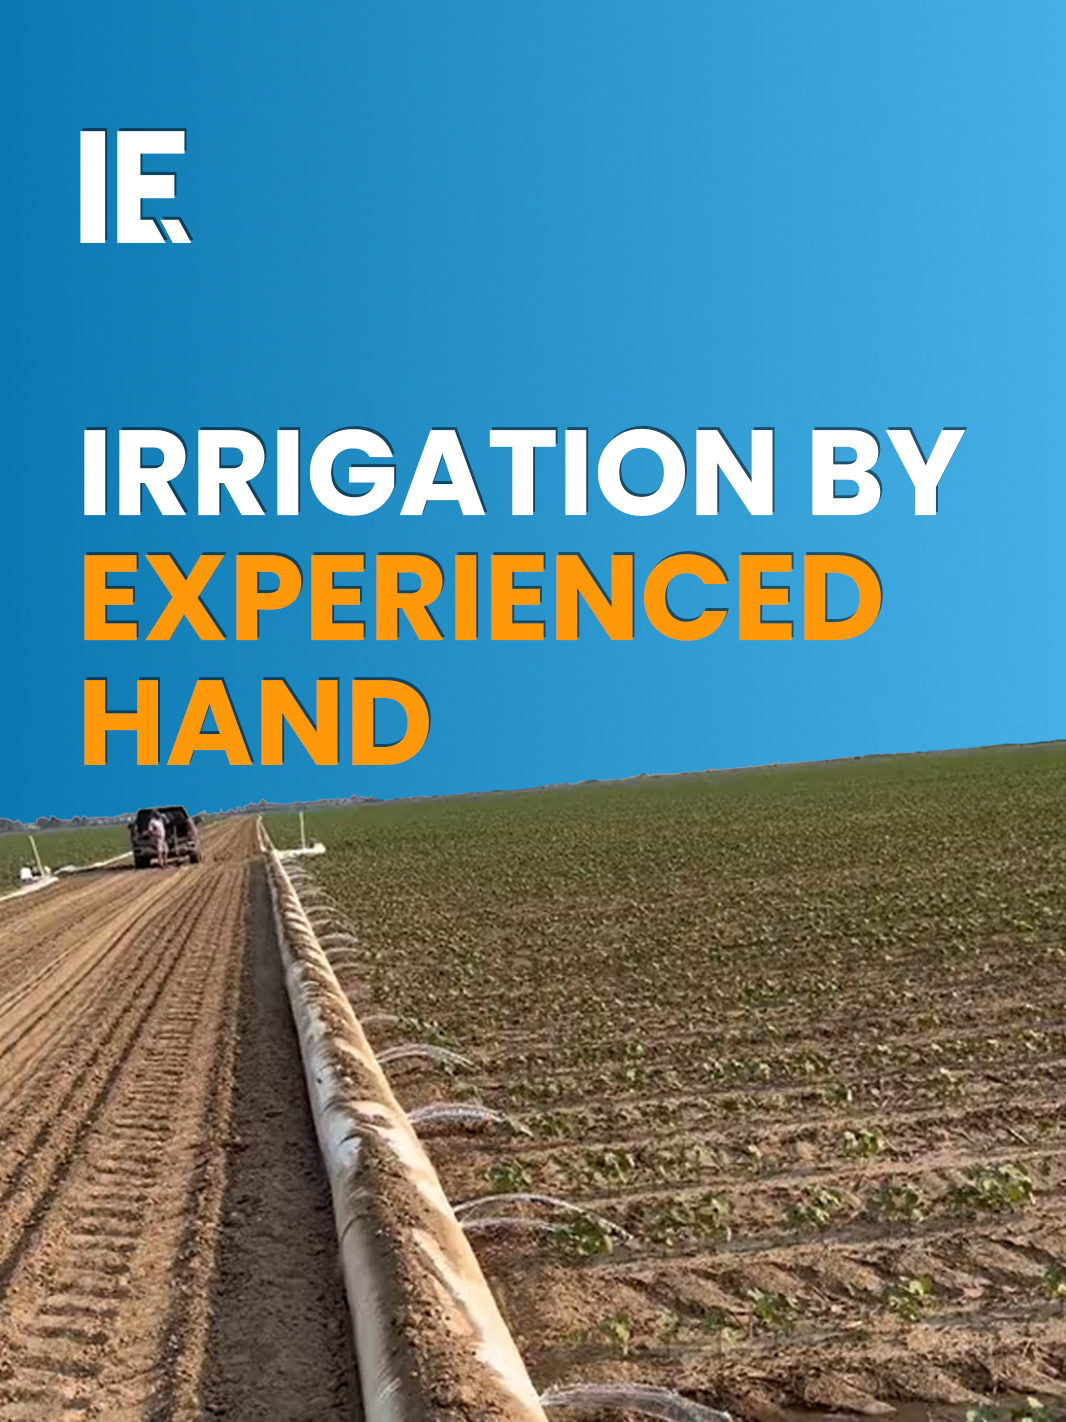 Smart farming is all about getting the best result through the best technology. Sometimes, that involves complex technology - sometimes, not. Choosing where irrigation holes are needed is sometimes best done by eye. #smartfarming#technology #complextechnology